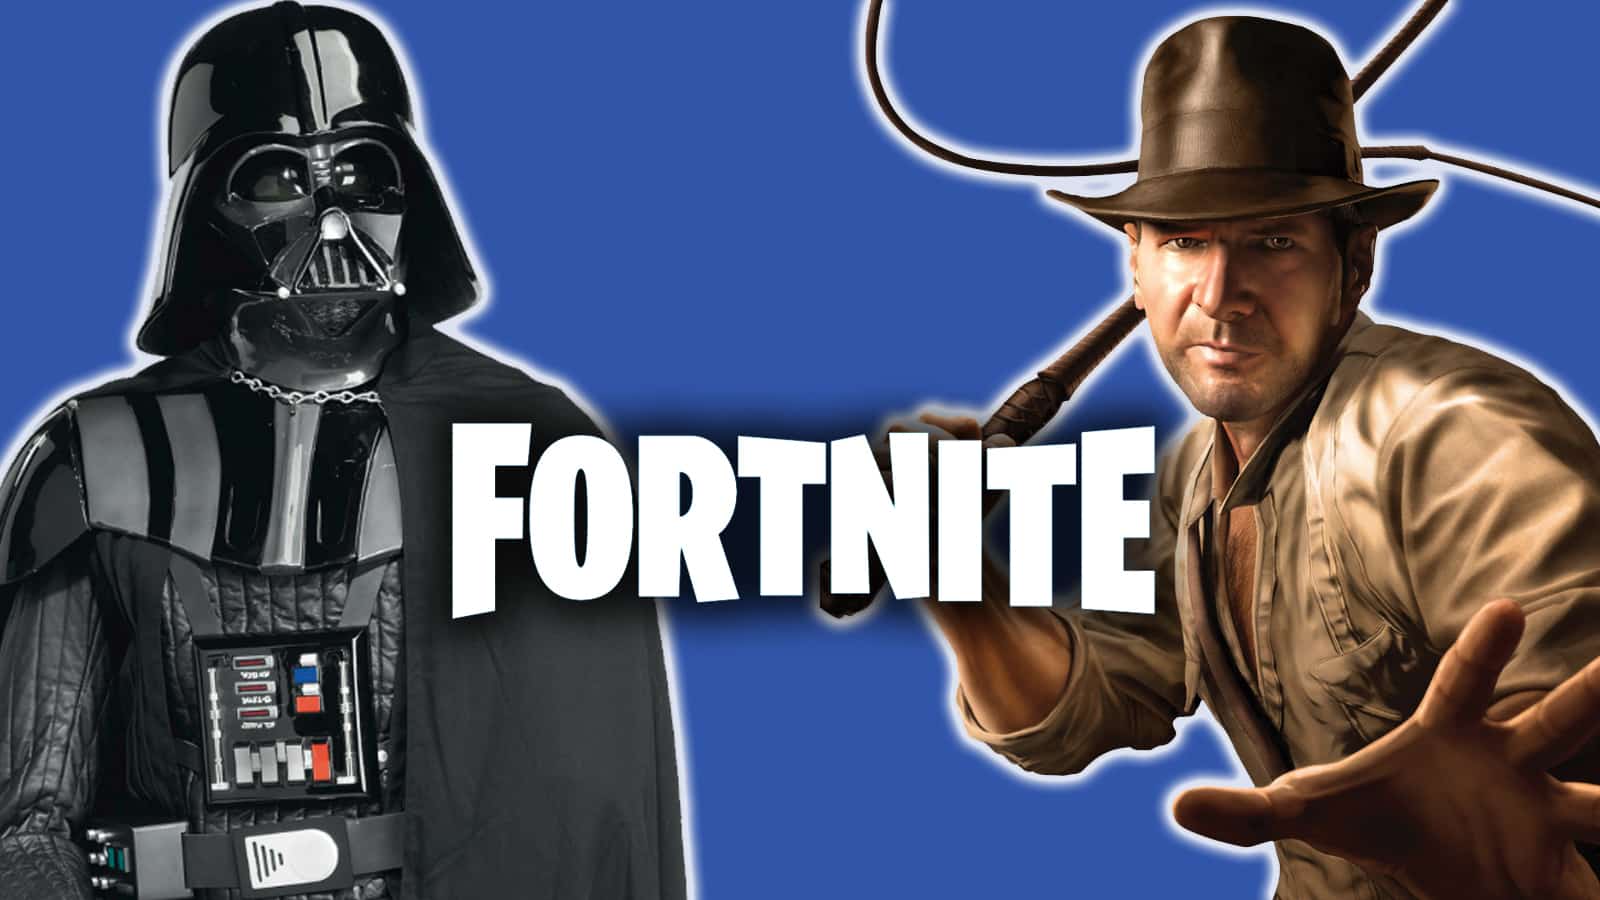 an image of indiana jones and darth vader in fortnite